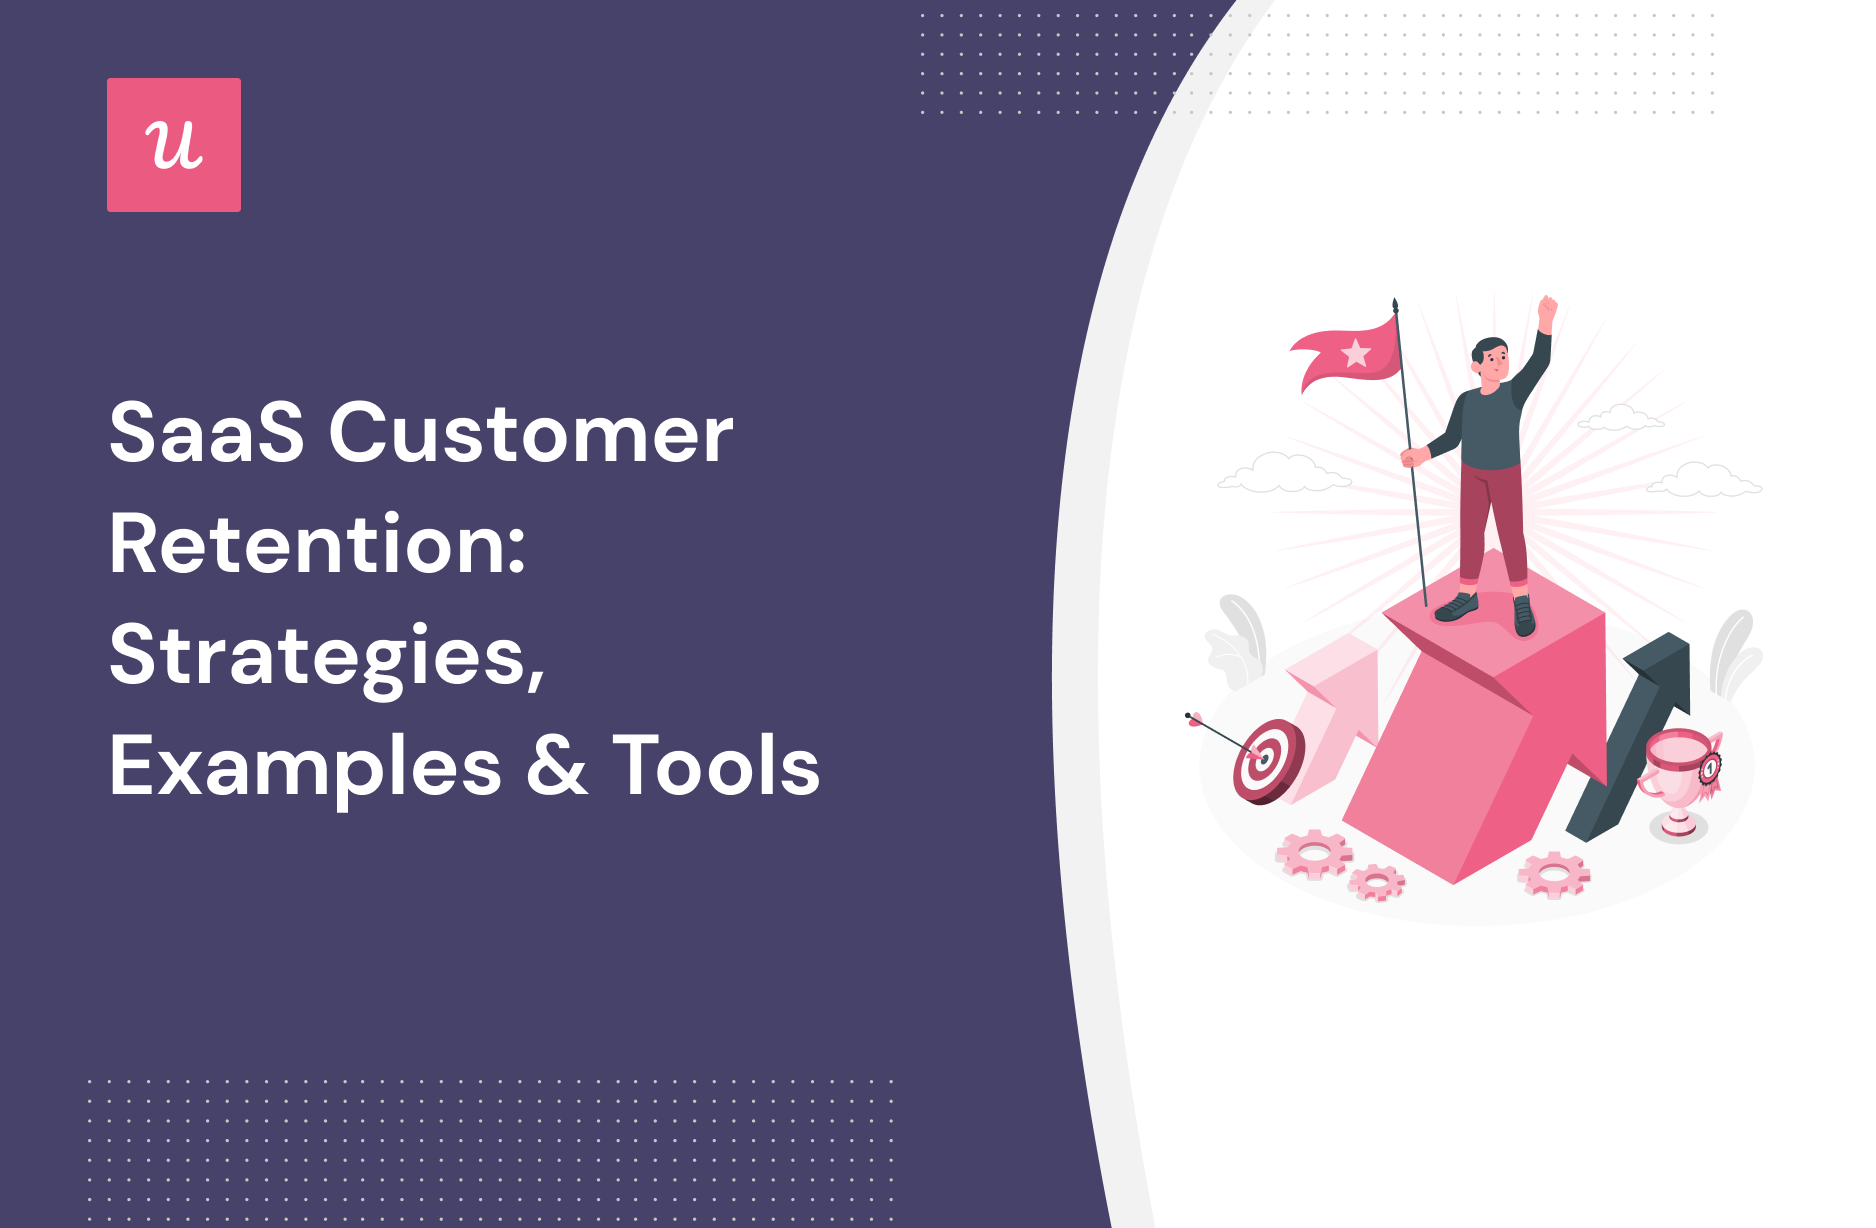 SaaS Customer Retention: Strategies, Examples and Tools